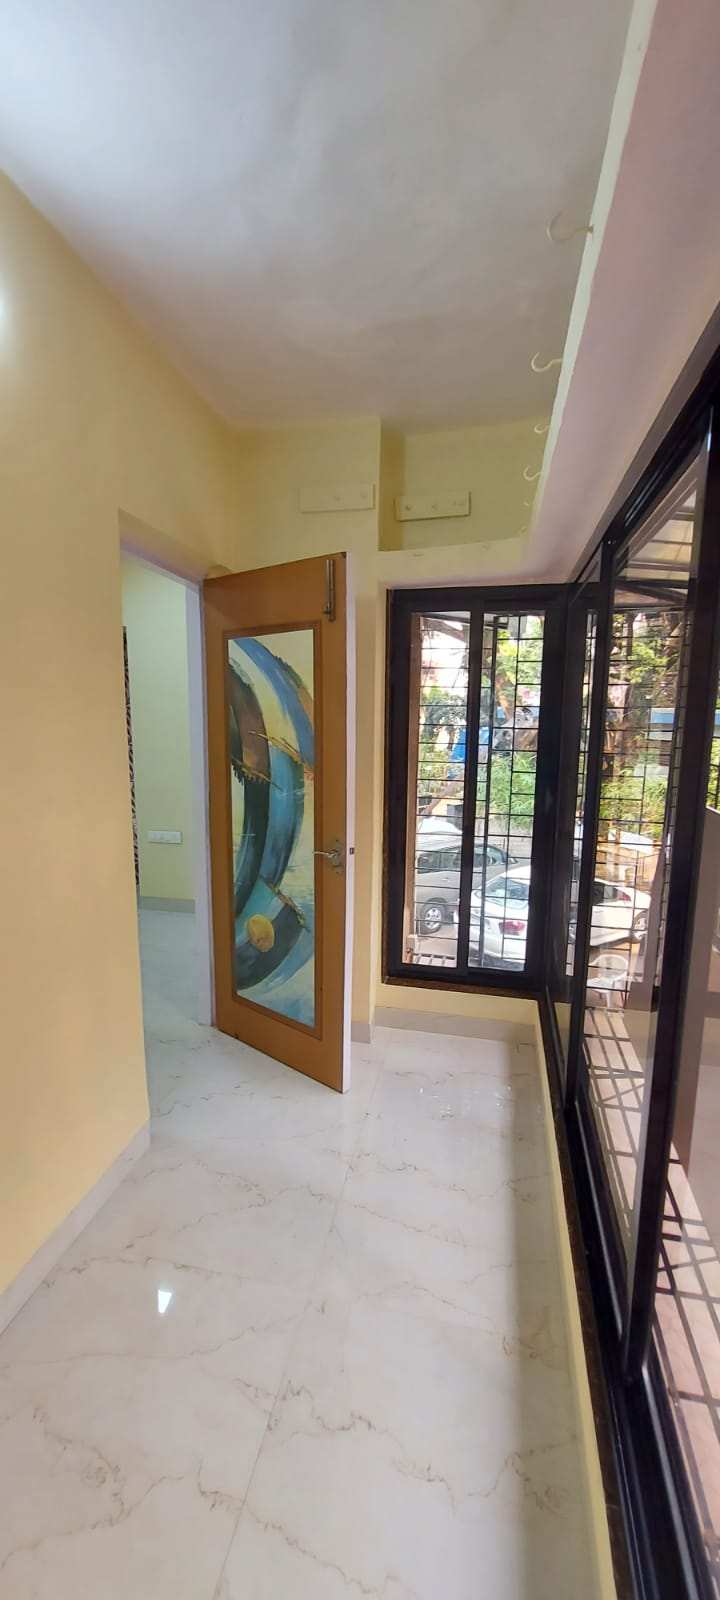 3BHK Apartment available on rent in Lokhandwala.